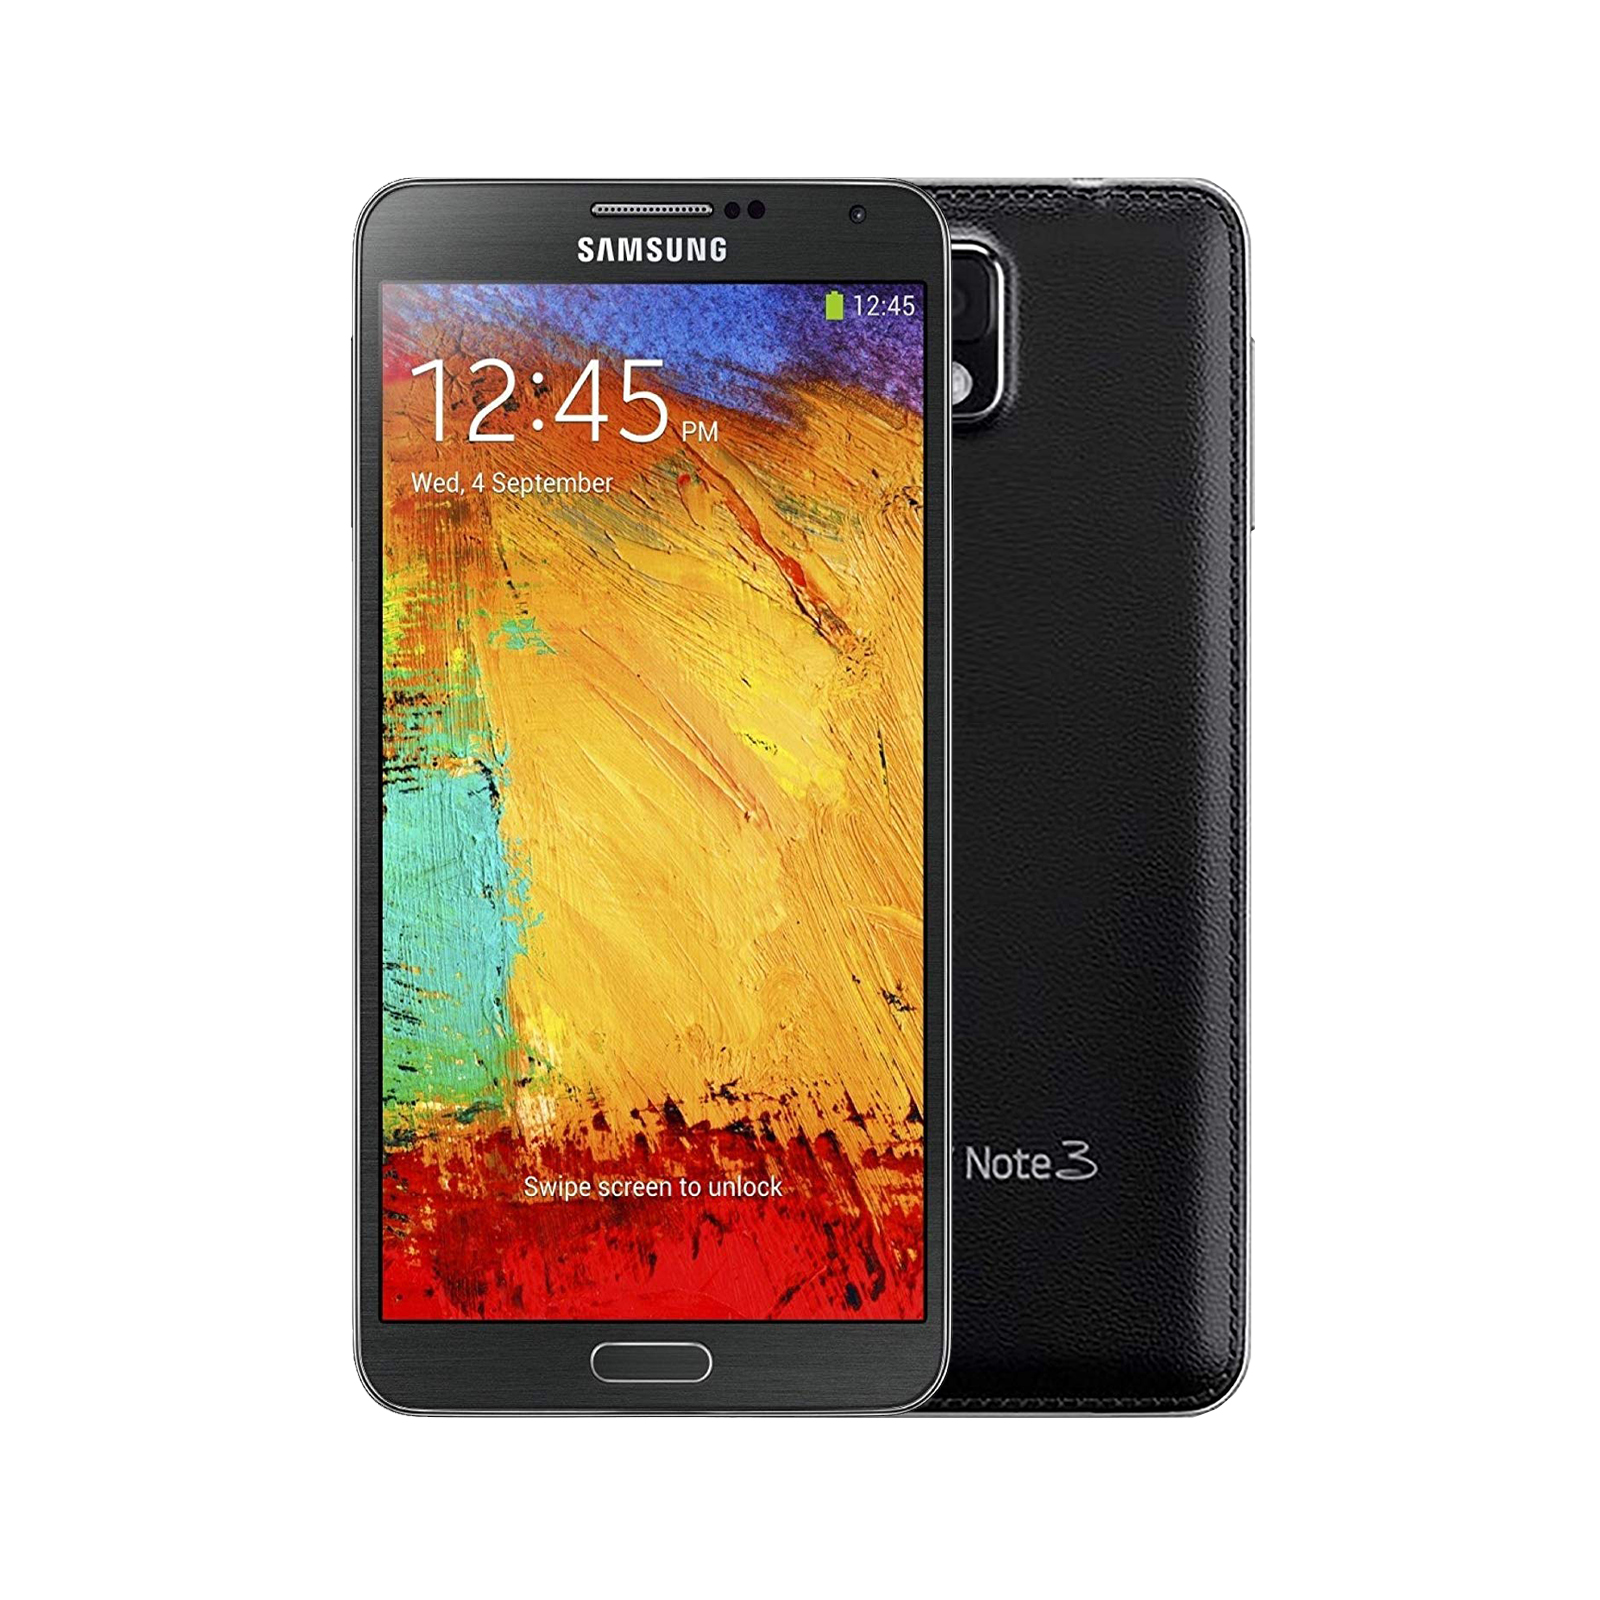 Samsung Galaxy Note 3 [Black] [Imperfect]